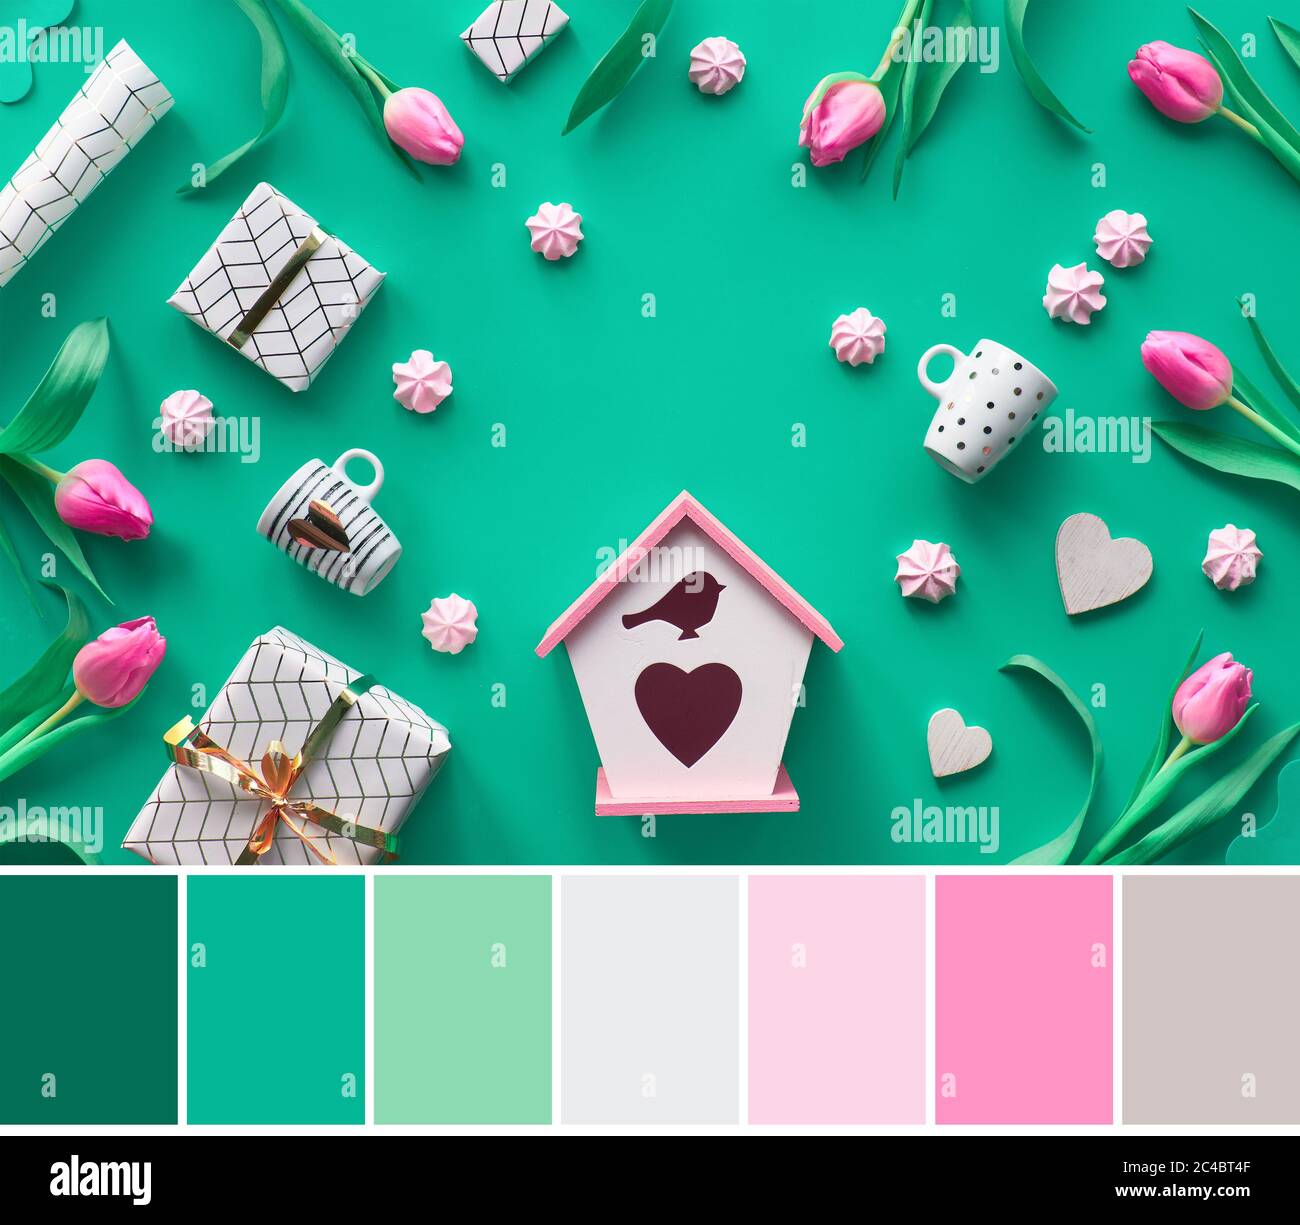 Color matching palette from flat lay image of Spring flat lay on green background. Birdhouse, white and gold coffee cups, pink tulips, gifts, hearts a Stock Photo